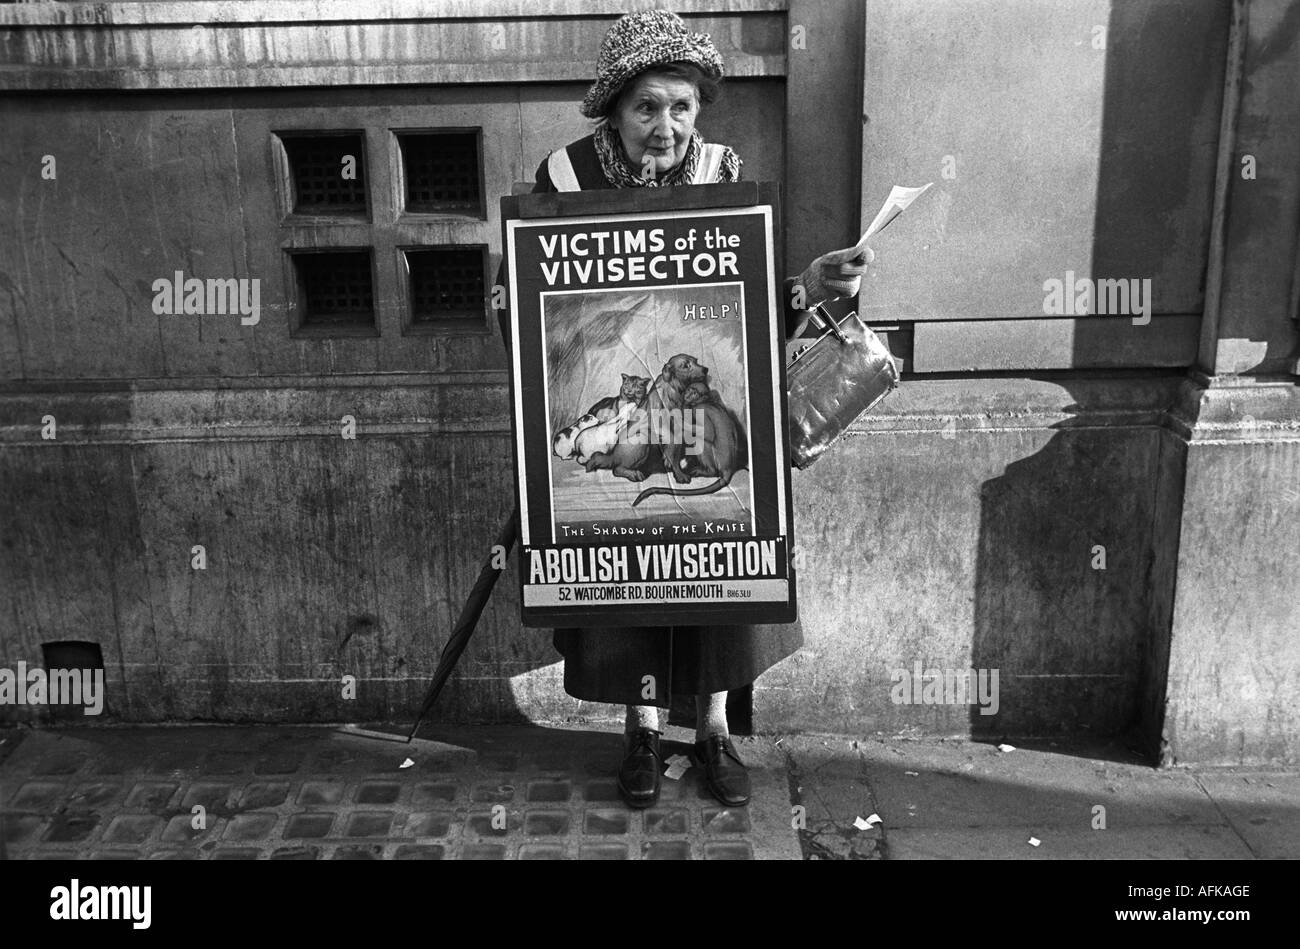 Vivisection protest Old age lady pensioner hands out leaflets Abolish Vivisection London 1970s HOMER SYKES Stock Photo